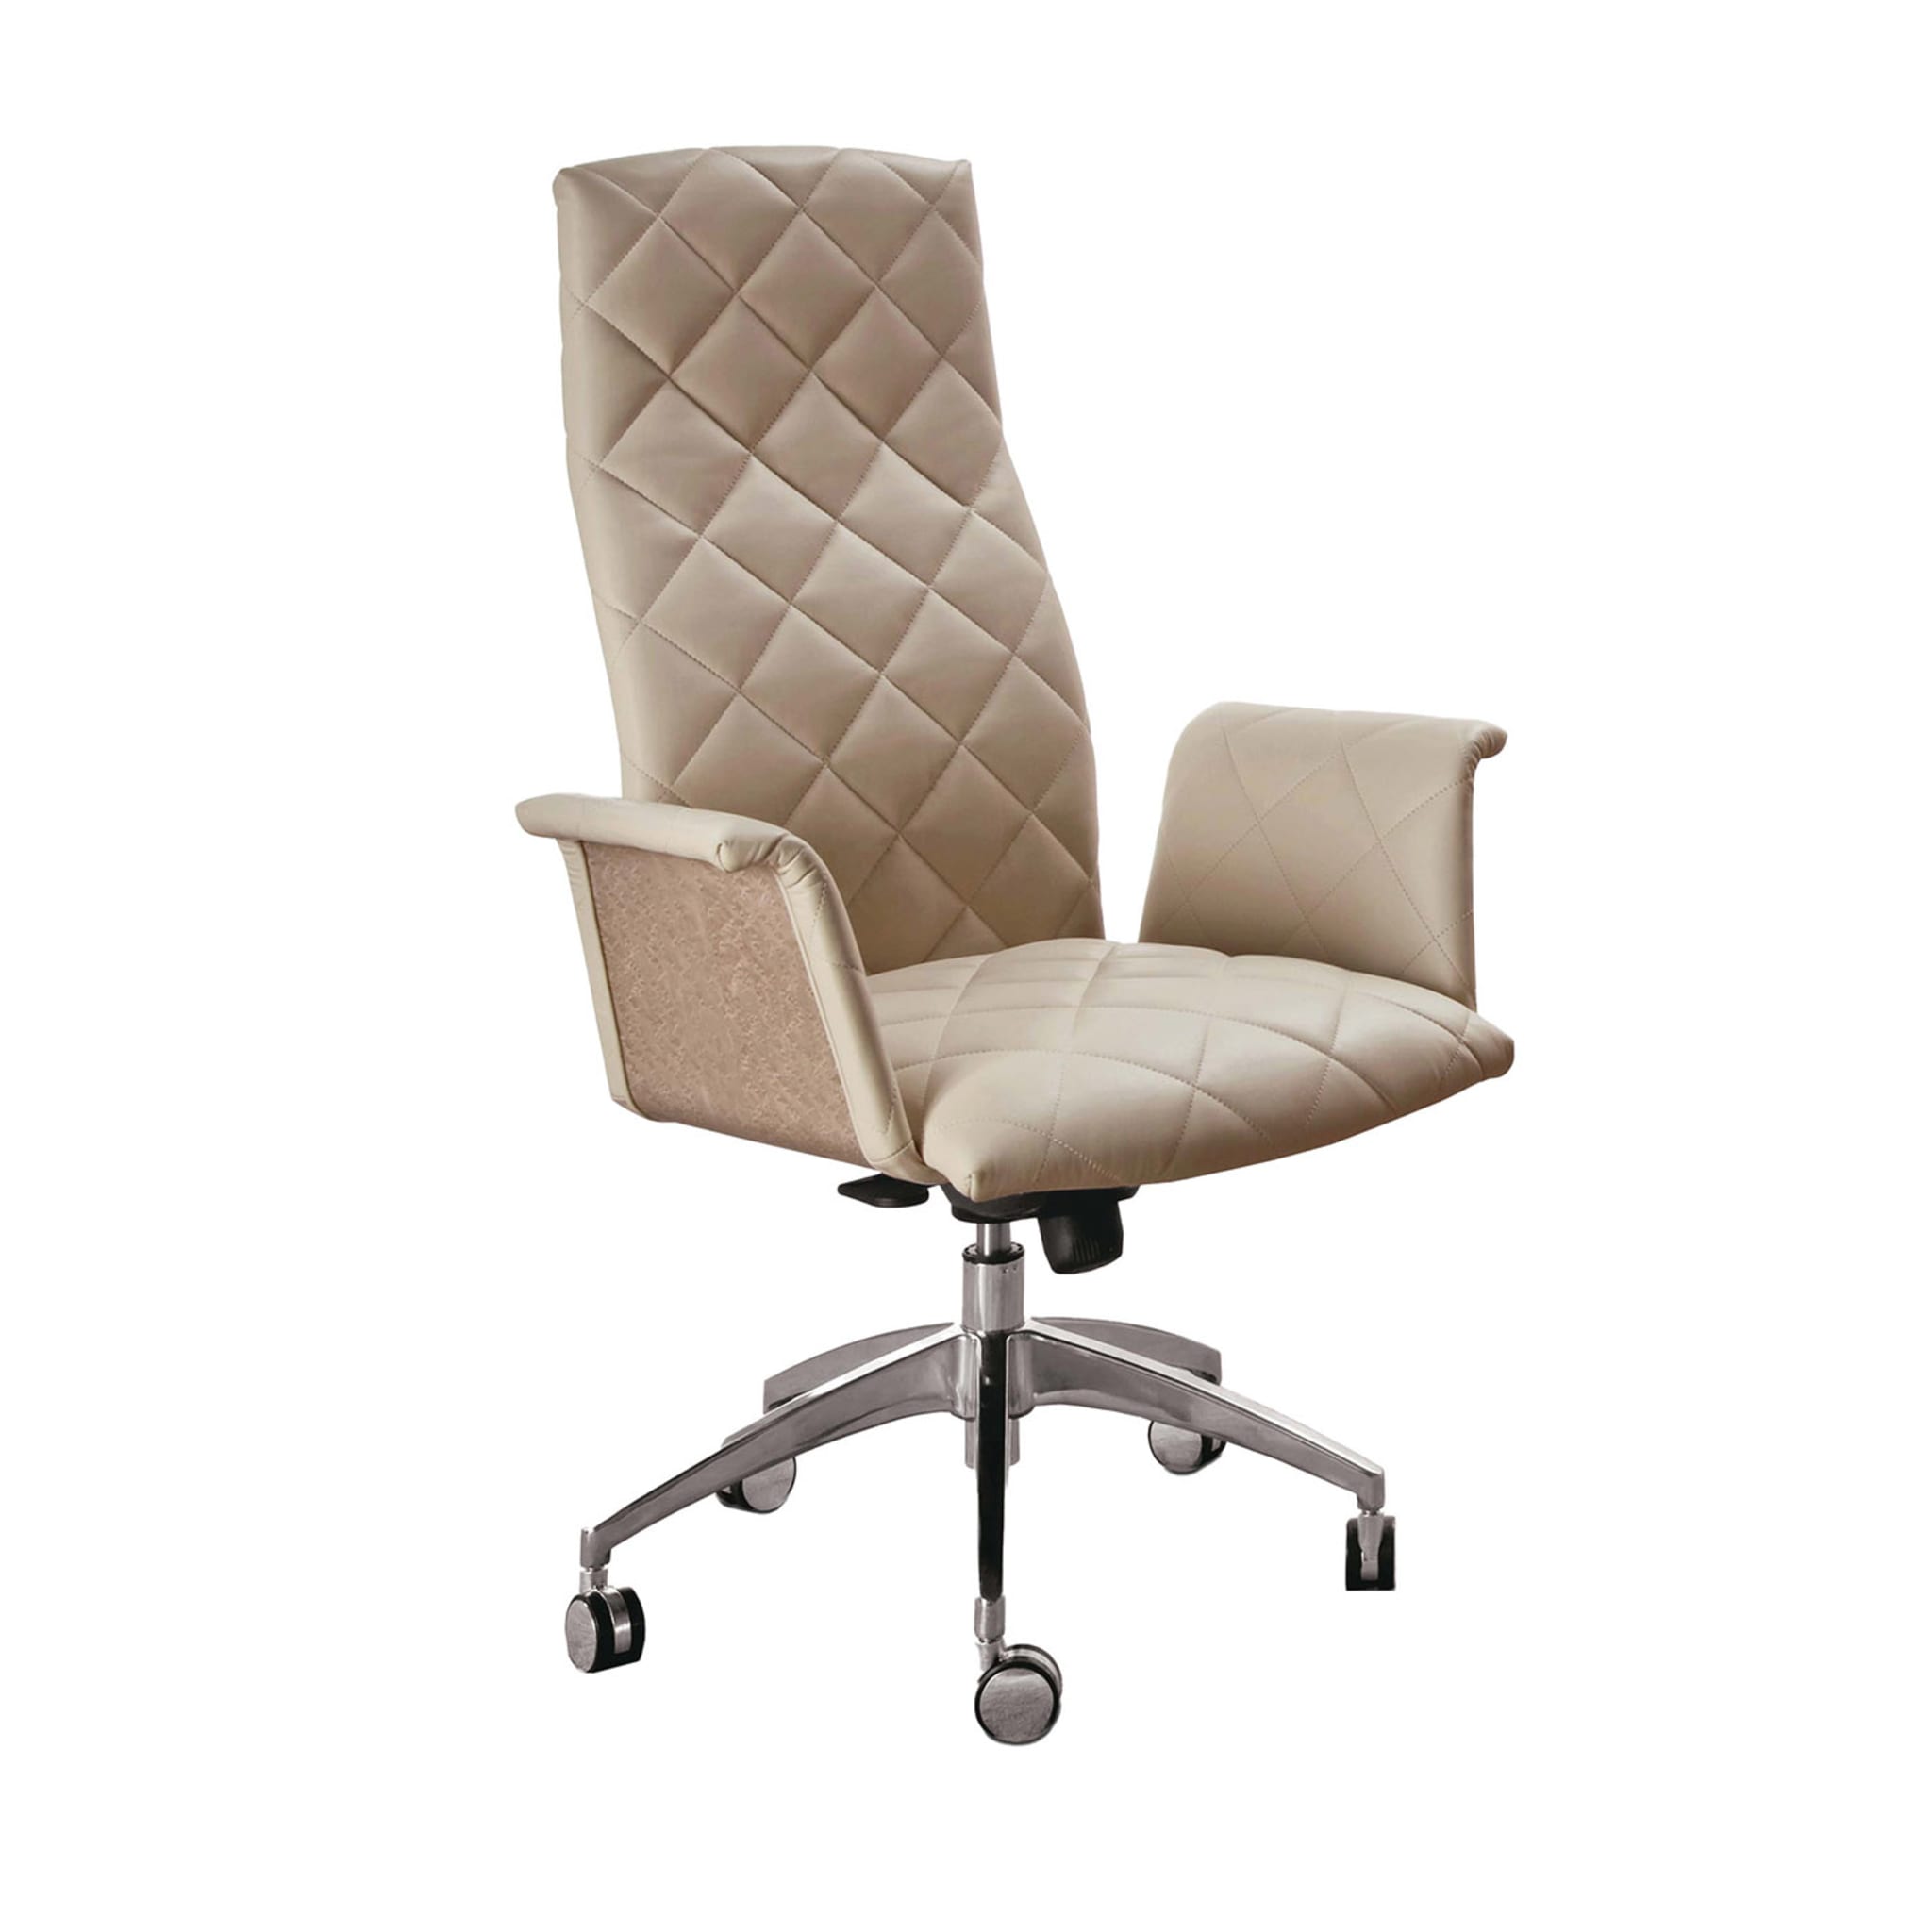 Presidential Beige Leather Office Chair - Main view